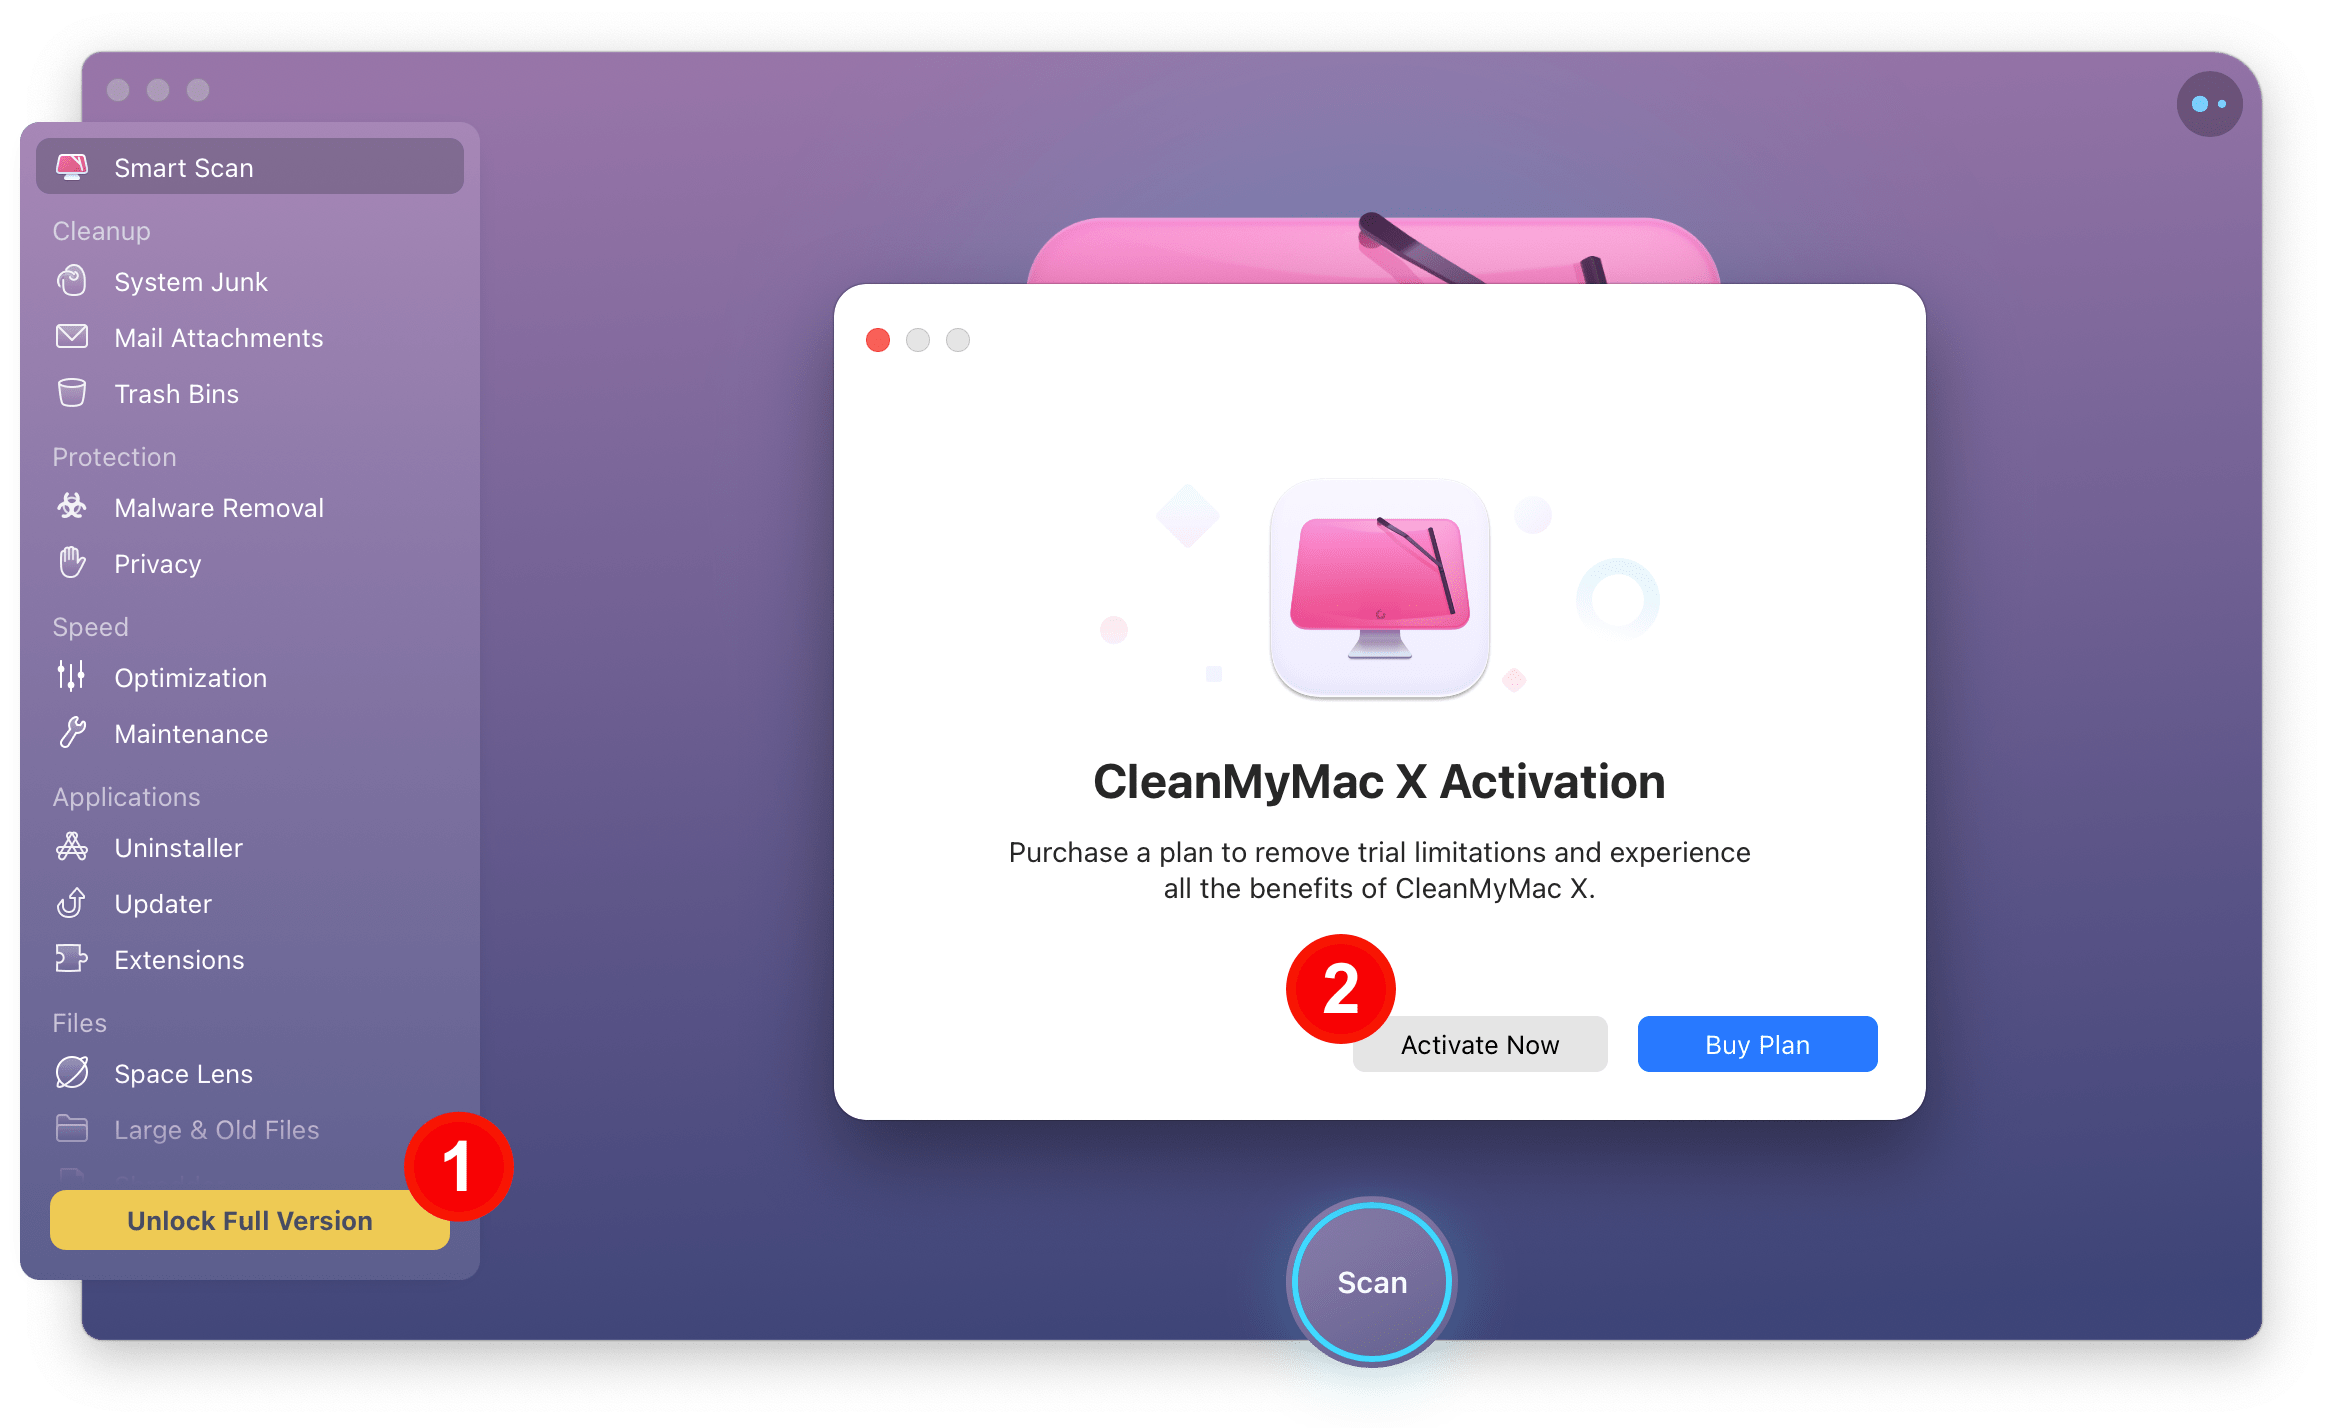 i own multiple licenses for clean my mac 3. enter the key?